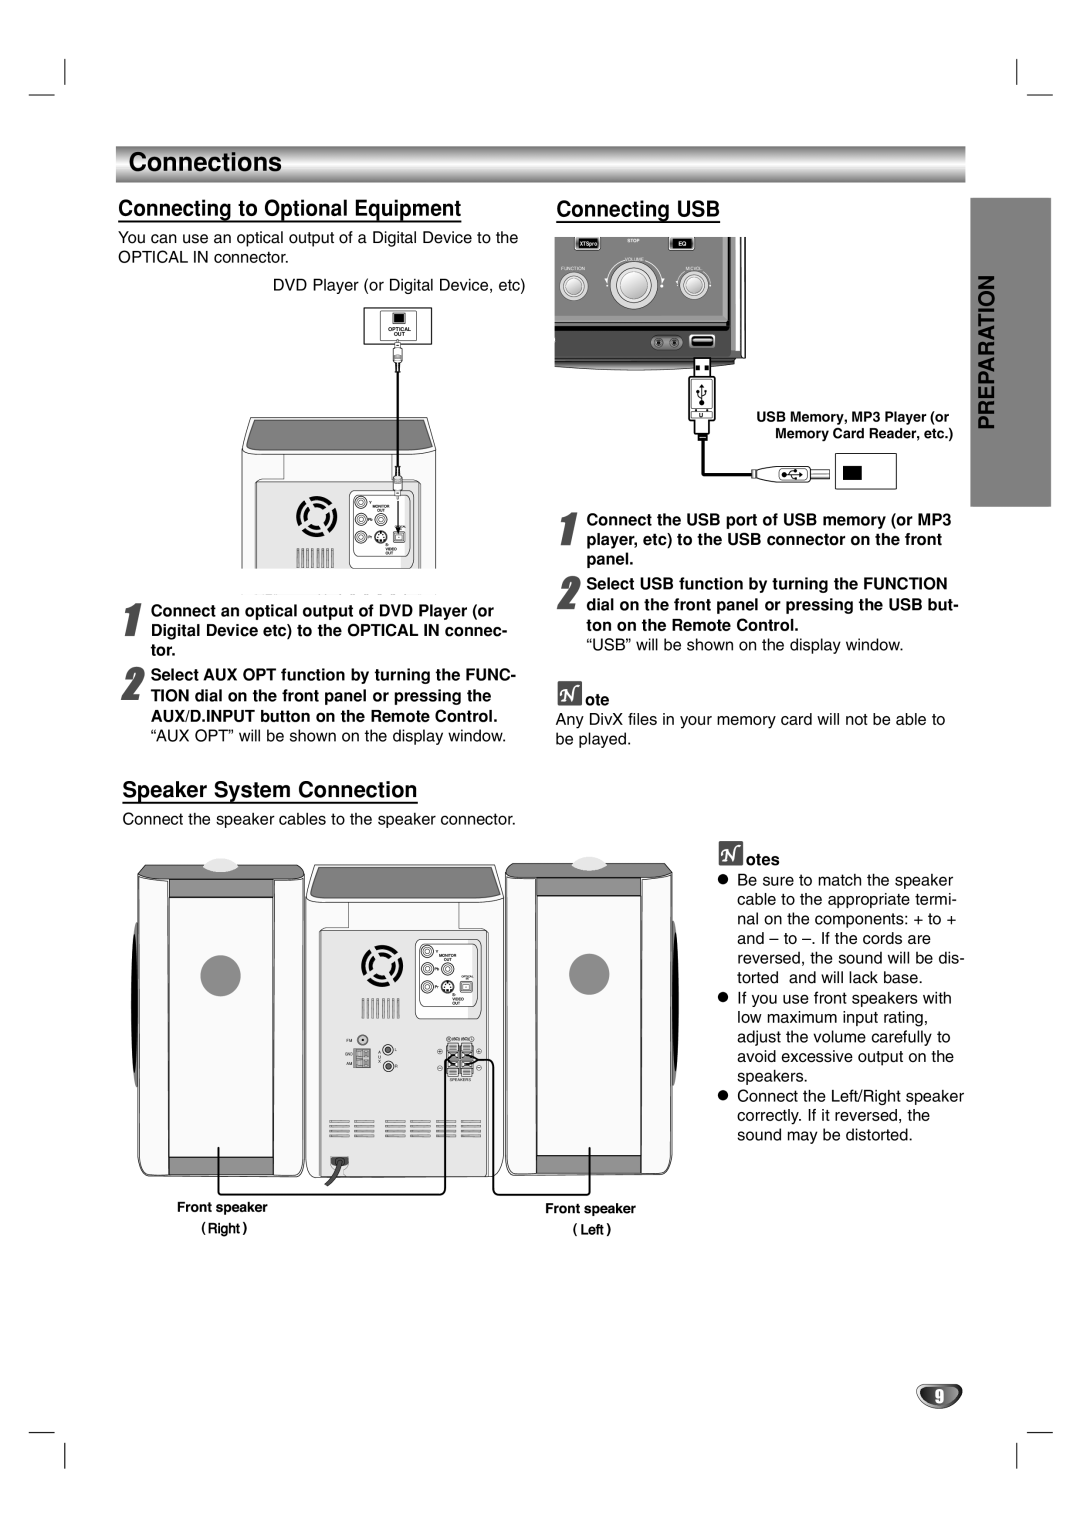 LG Electronics LF-D7150 owner manual Connections, Connecting to Optional Equipment, Connecting USB, Preparation 